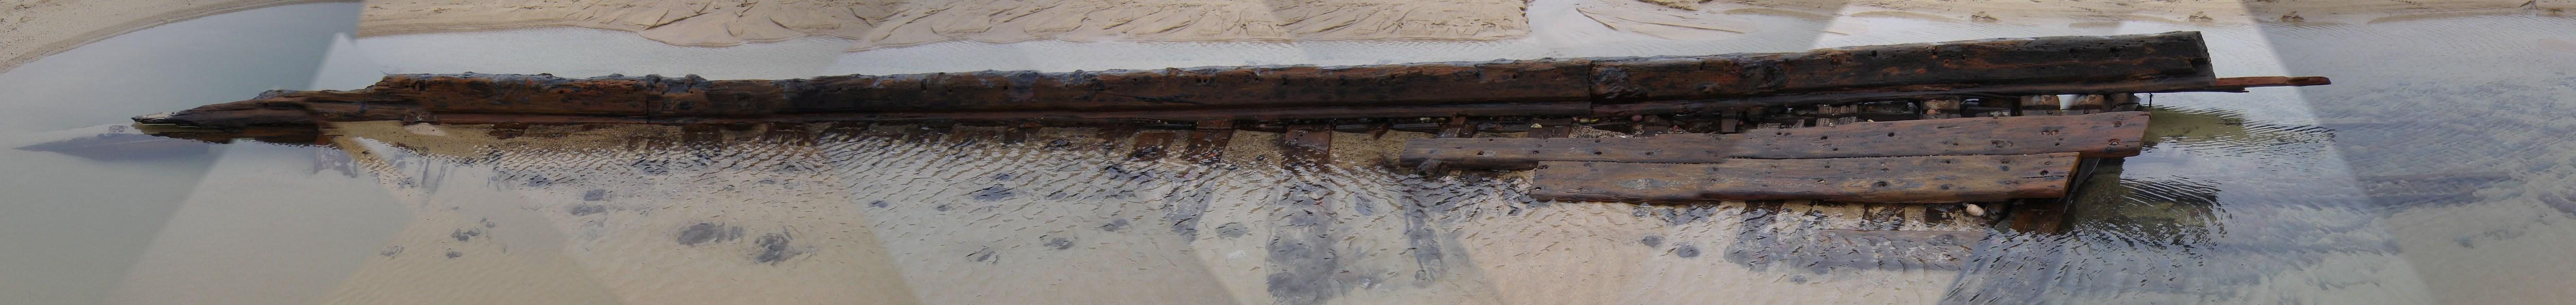  A Photomosaic of the South Side of the "Upside Down Wreck" on Freshwater West Beach